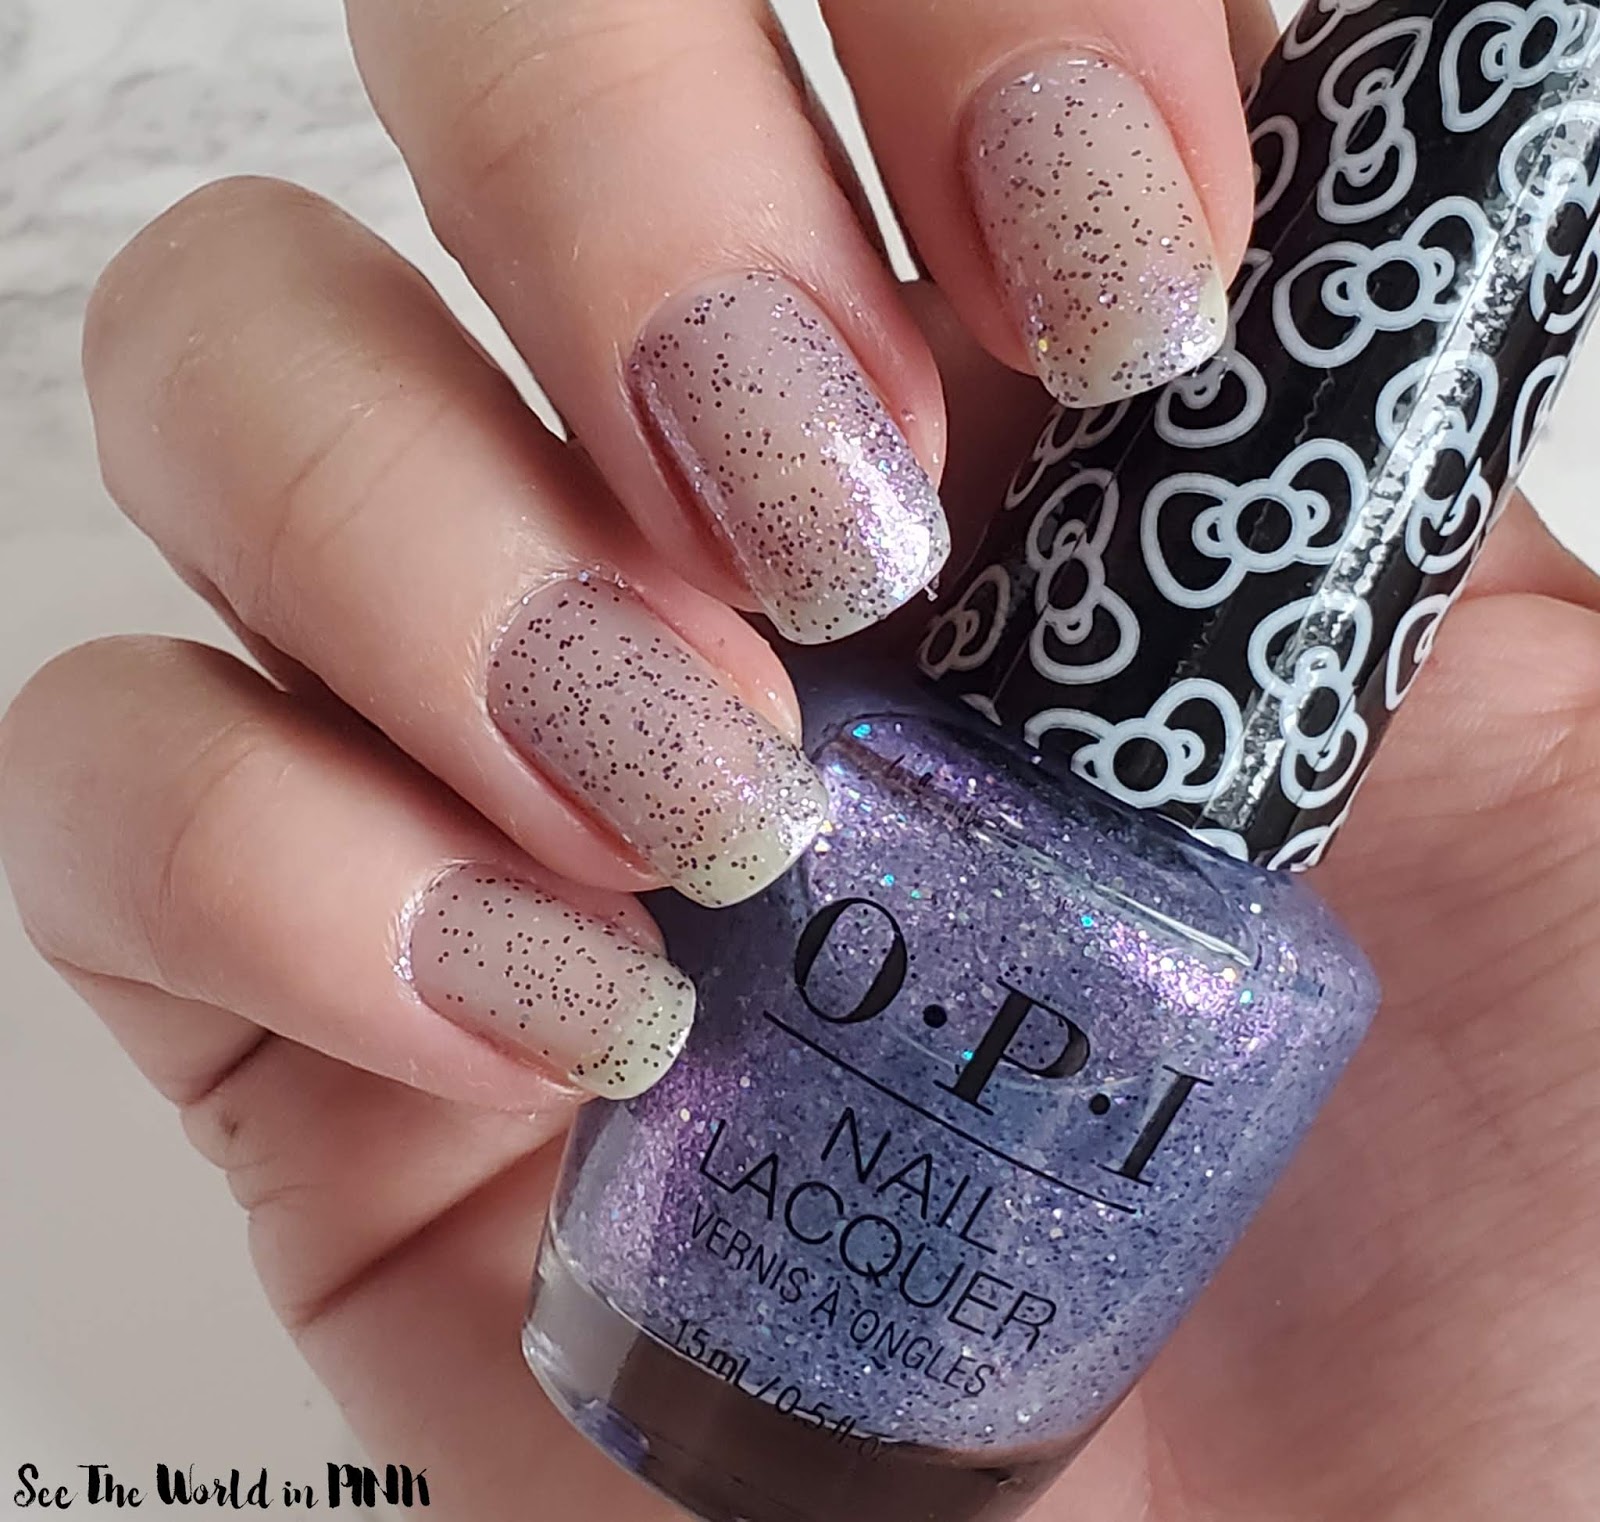 OPI Pile on the Sprinkles